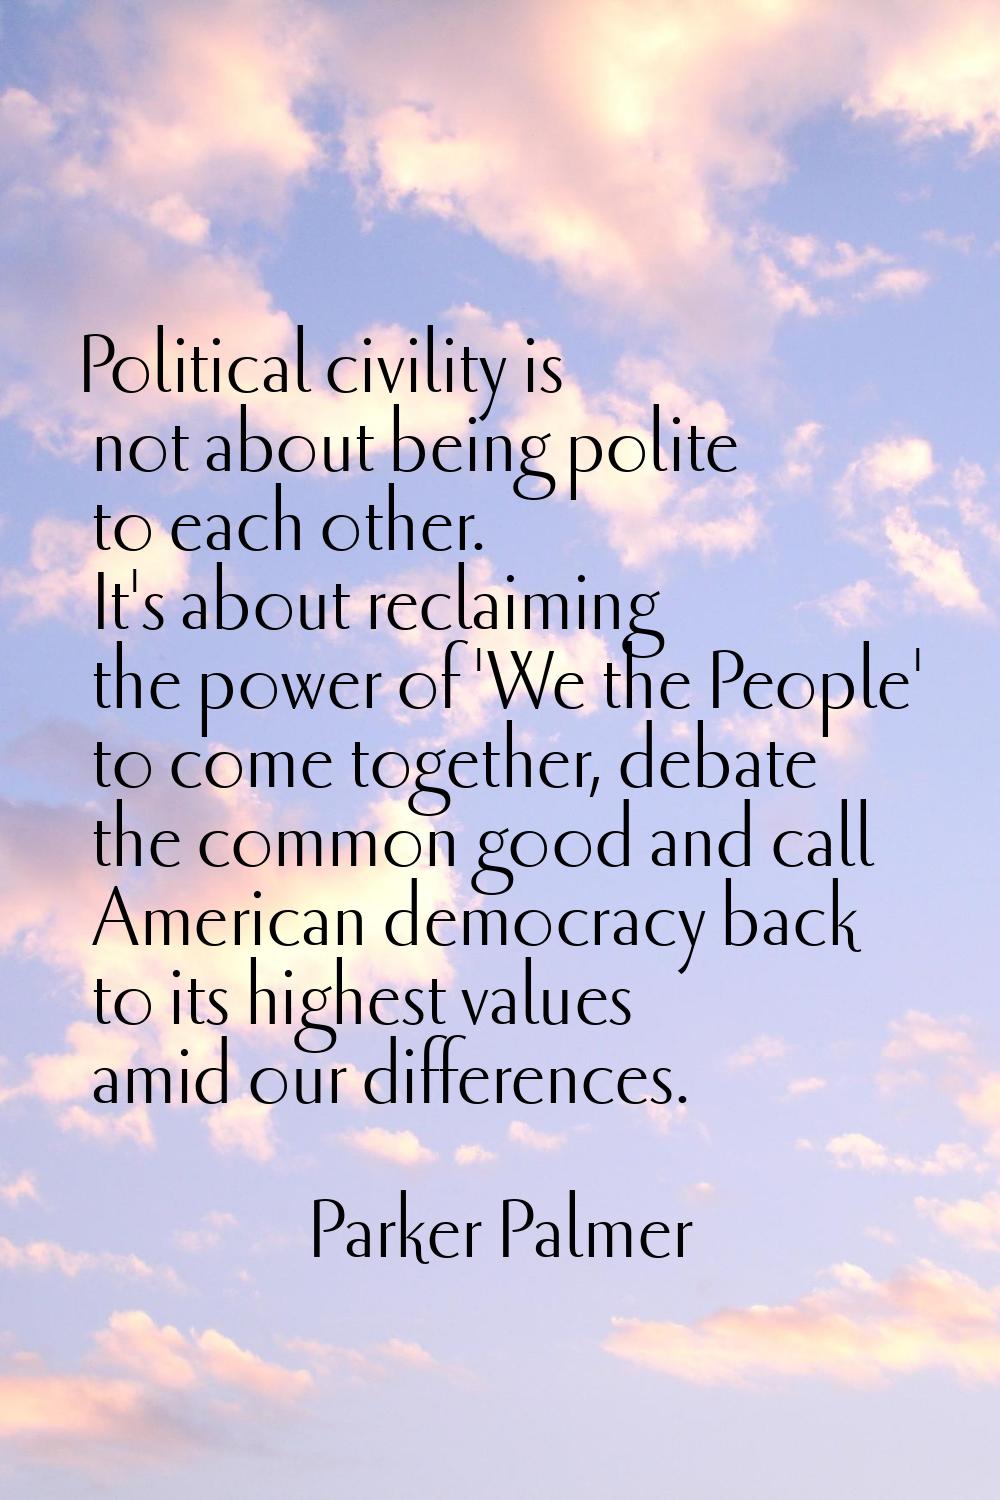 Political civility is not about being polite to each other. It's about reclaiming the power of 'We 